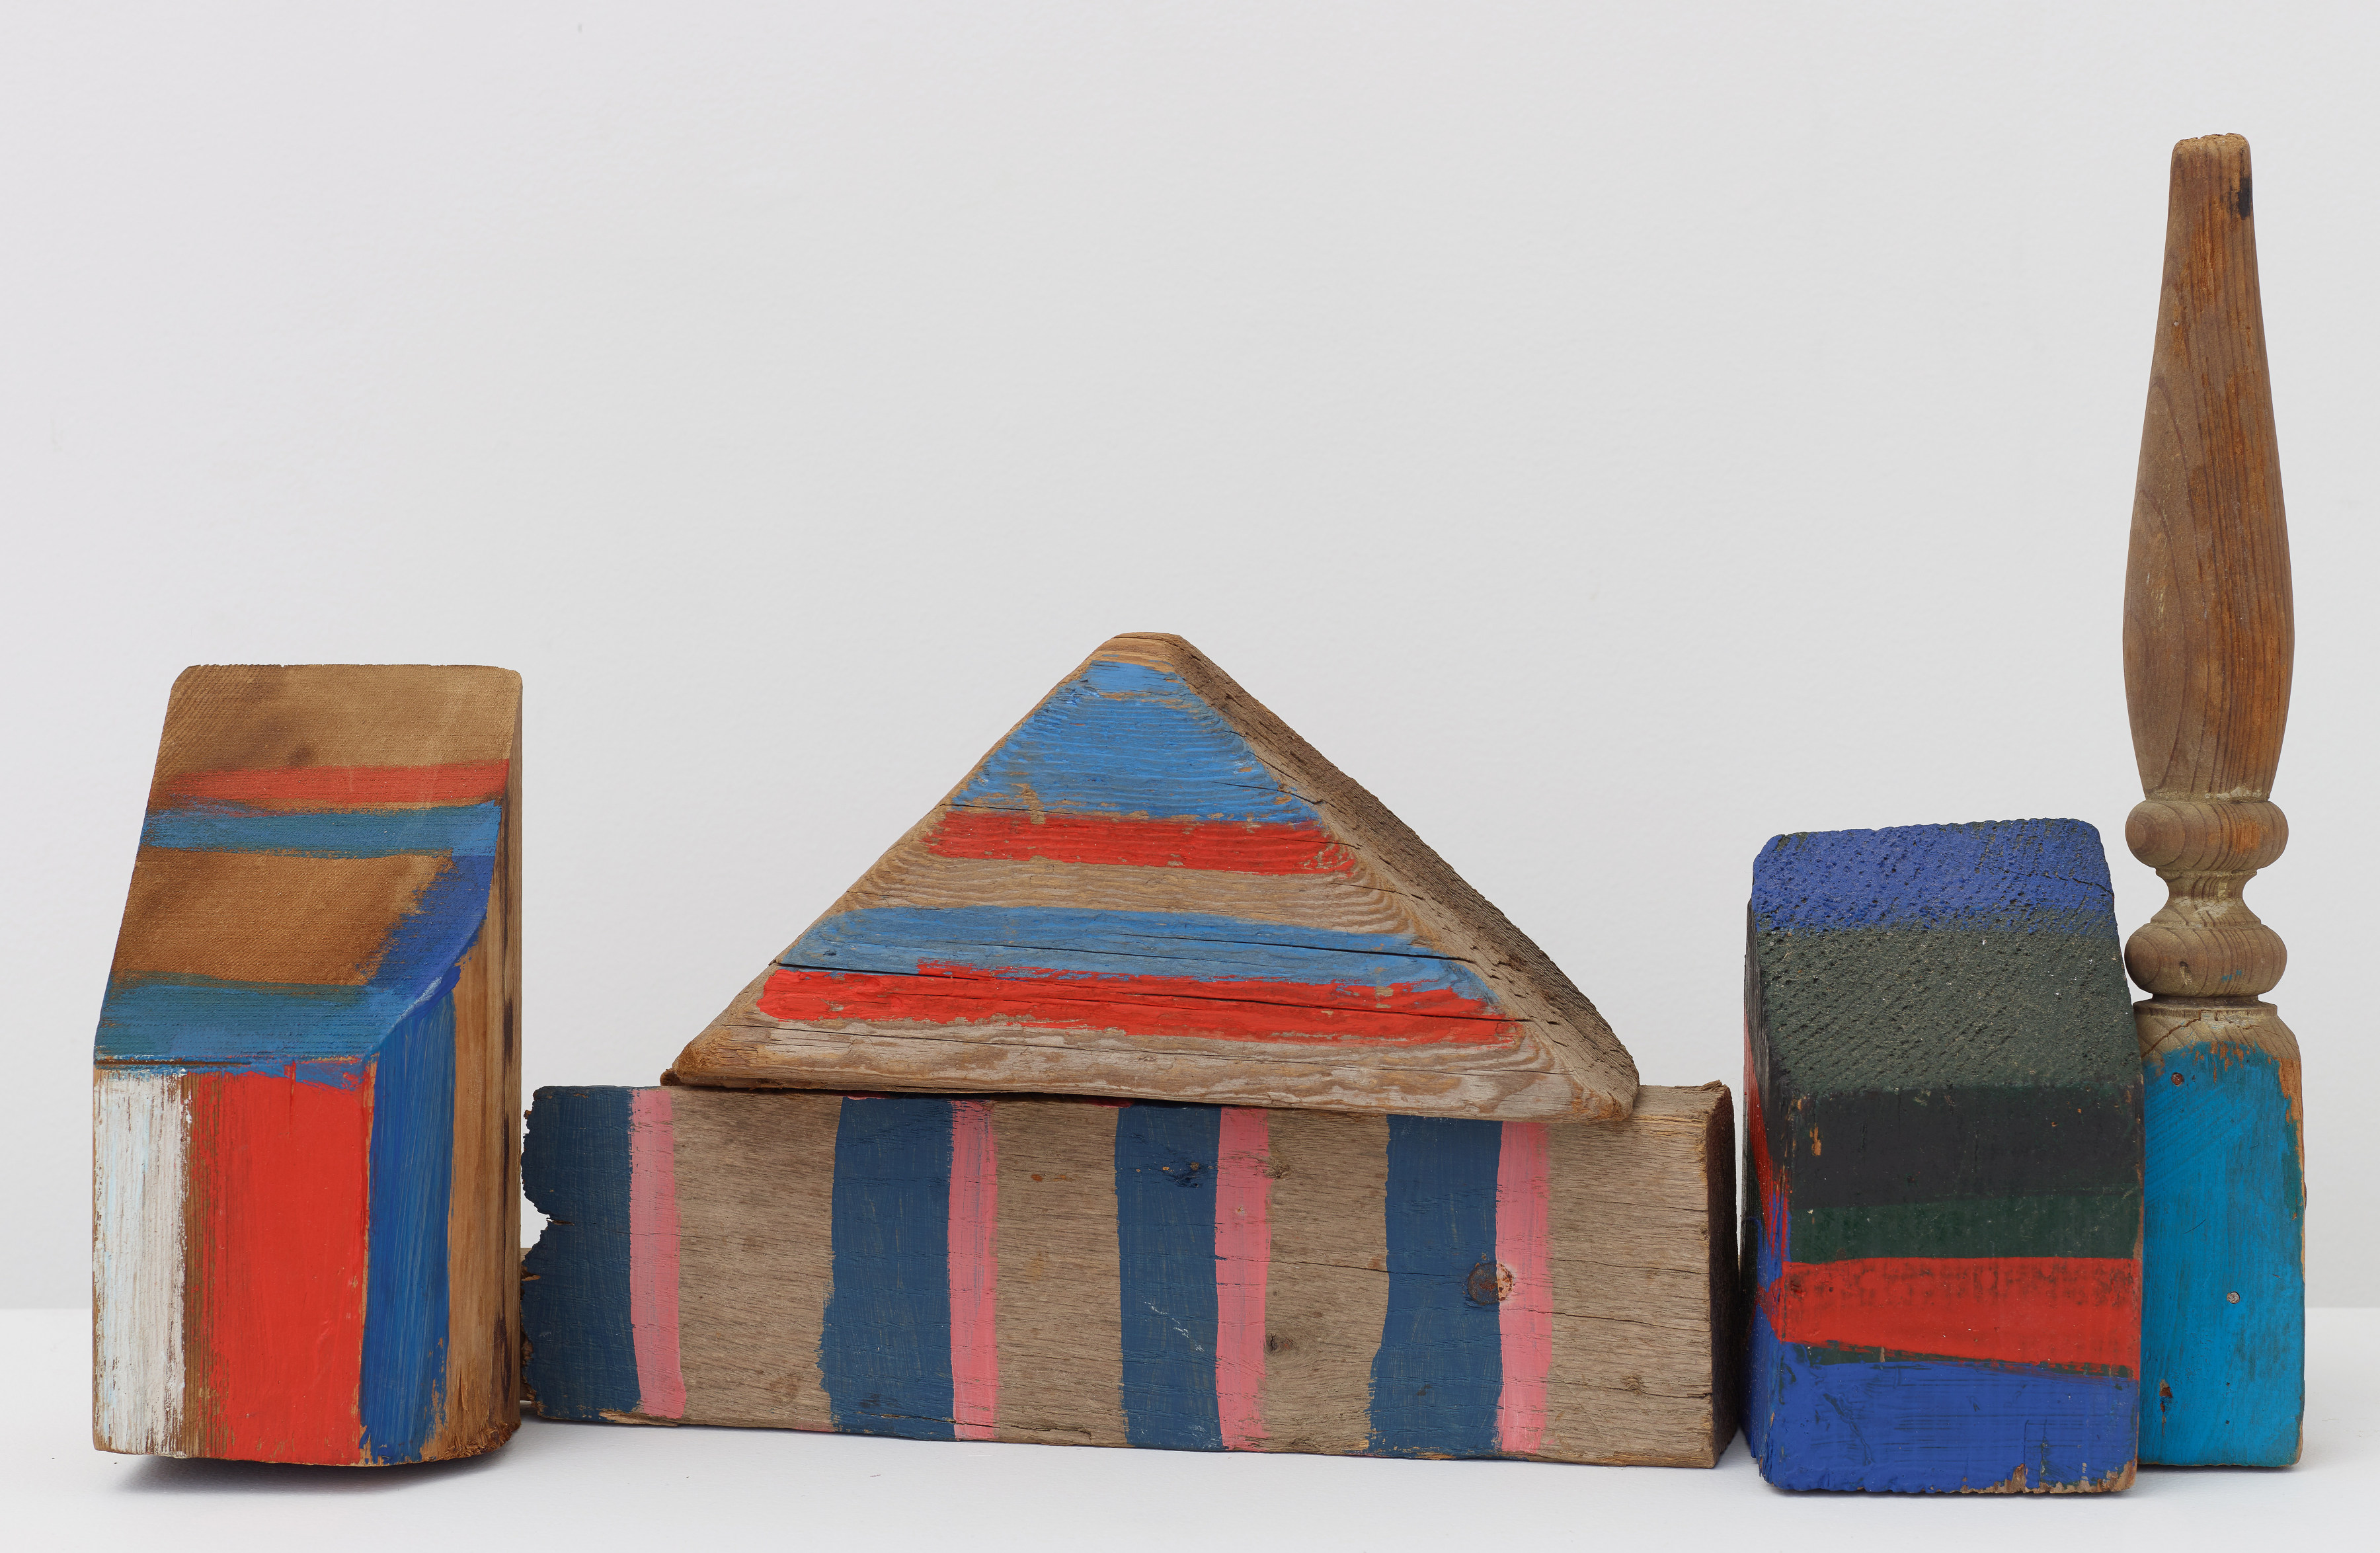 African Village, 1981, Wood, paint, and hardware